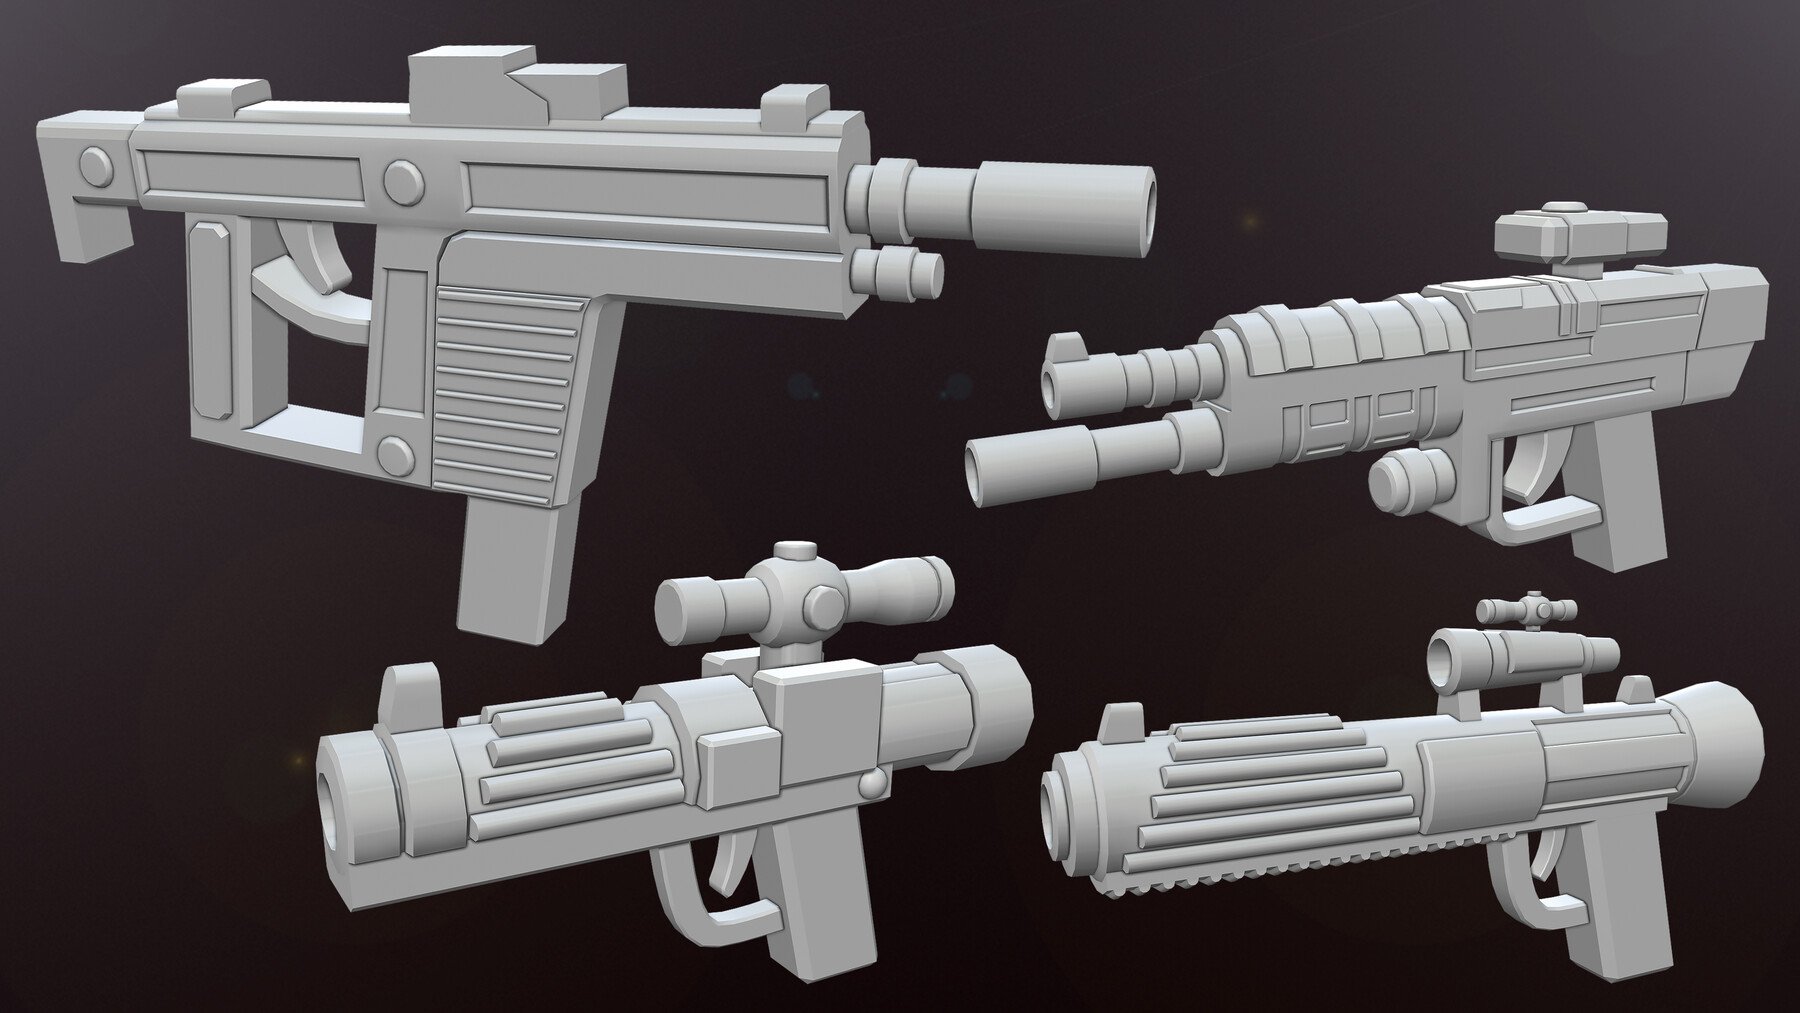 ArtStation - Sci-fi Gun Base meshes (with uv) | Game Assets